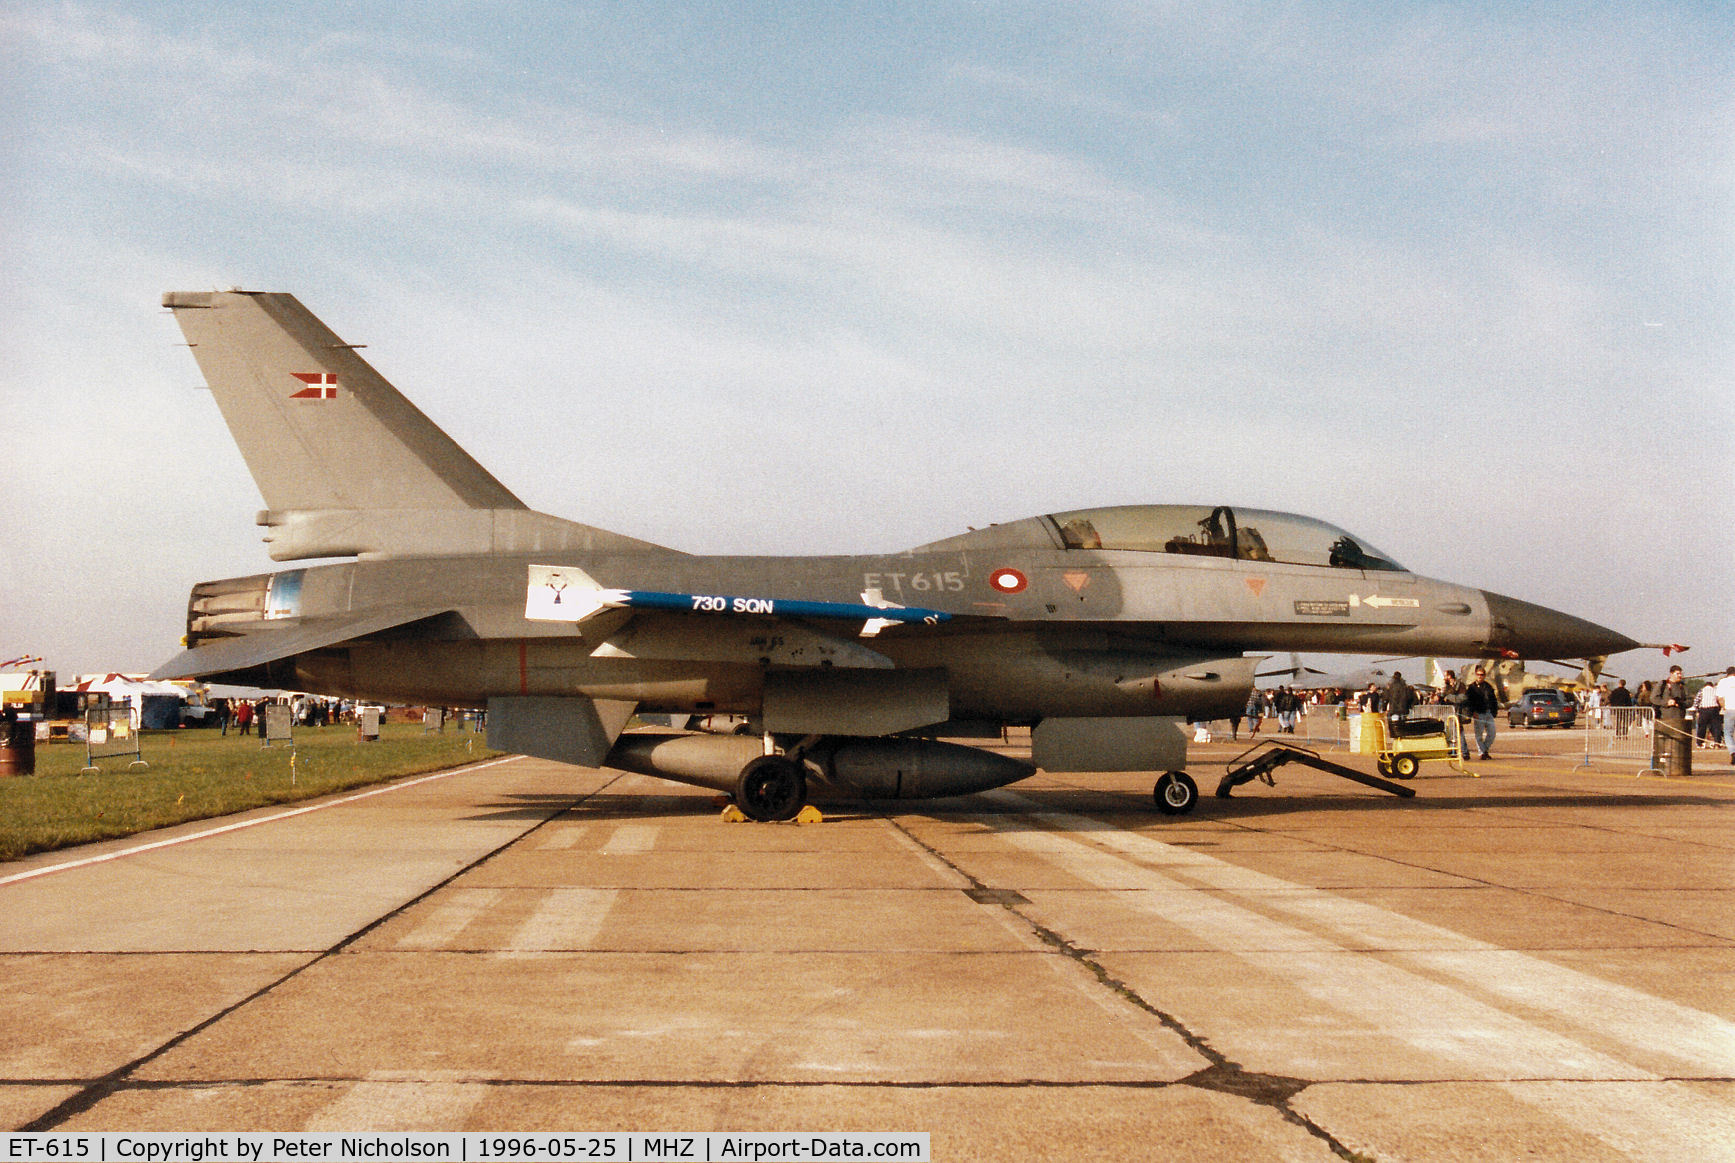 ET-615, General Dynamics F-16BM Fighting Falcon C/N 6G-12, F-16B of Eskradille 730 Royal Danish Air Force, but operated by 727 Eskradille and before Mid-Life Update, on display at the 1996 RAF Mildenhall Air Fete.